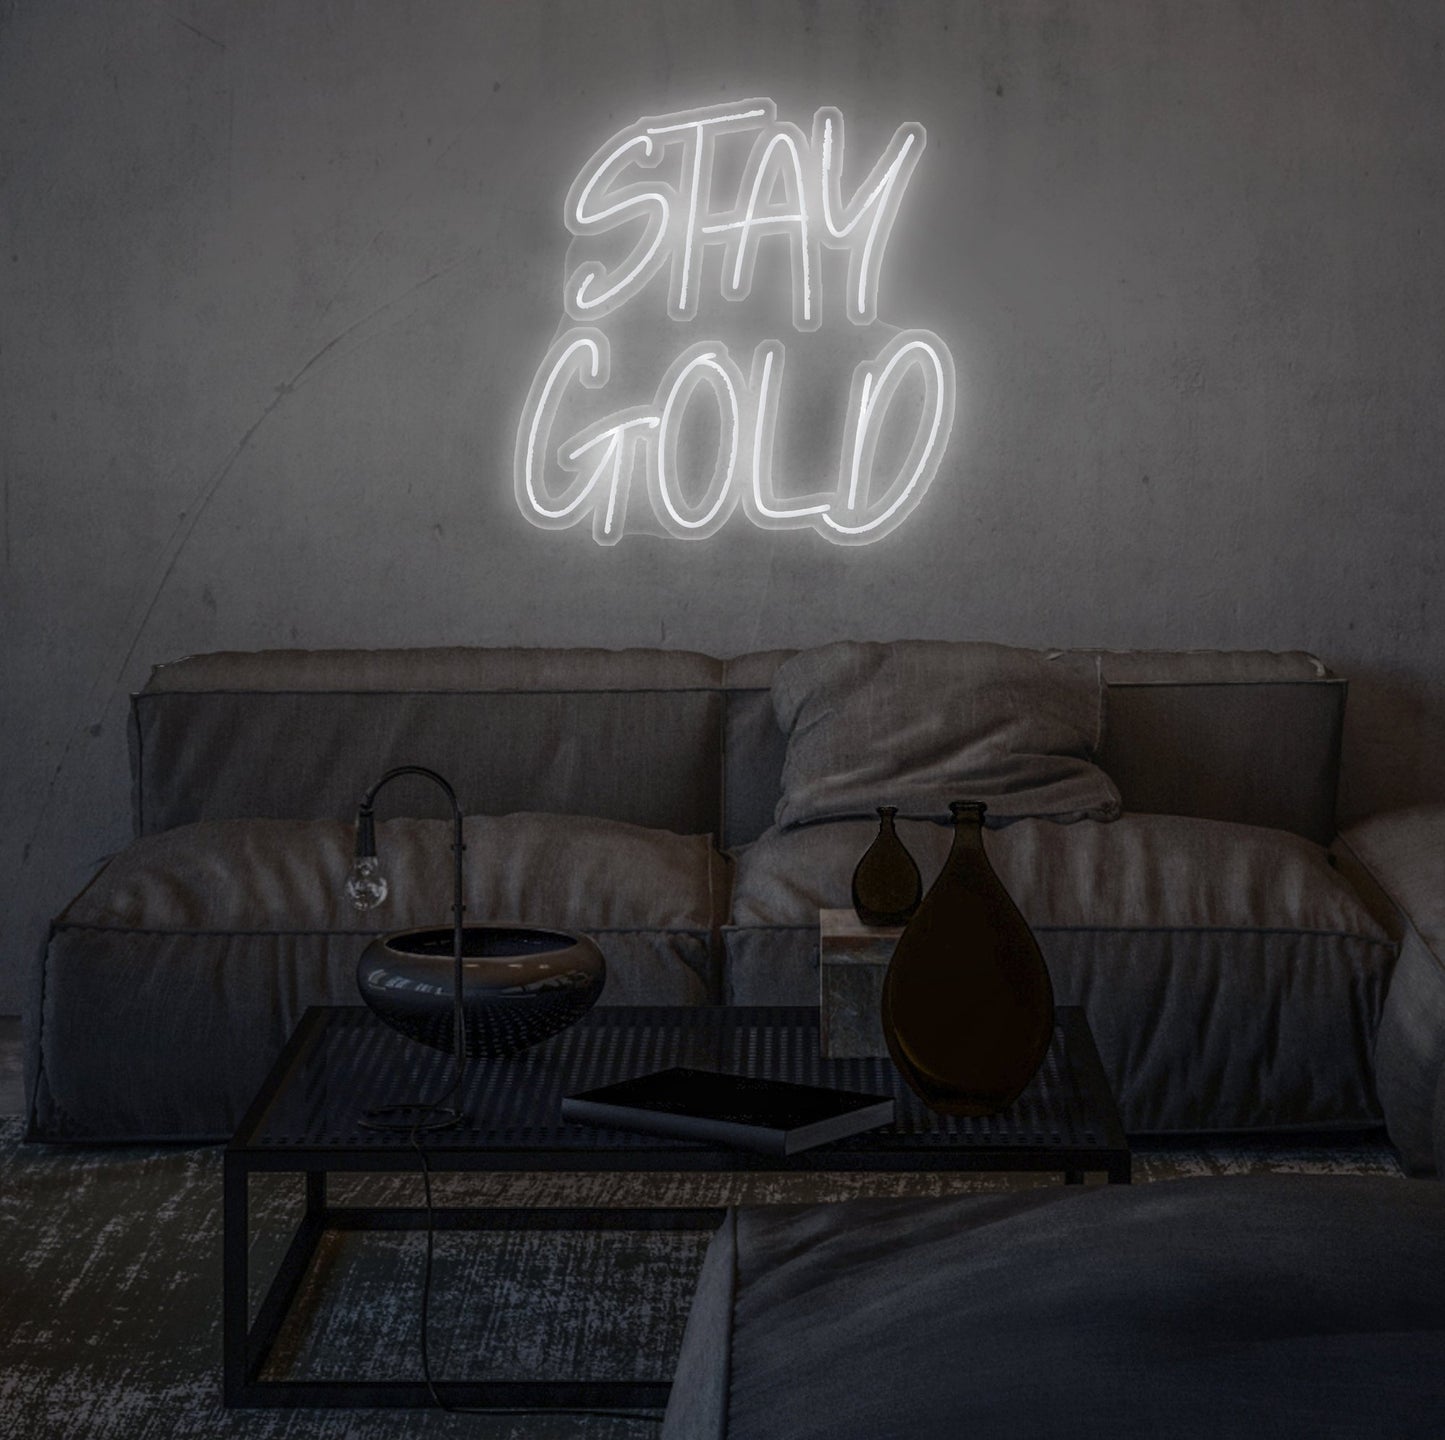 Stay Gold LED Sign